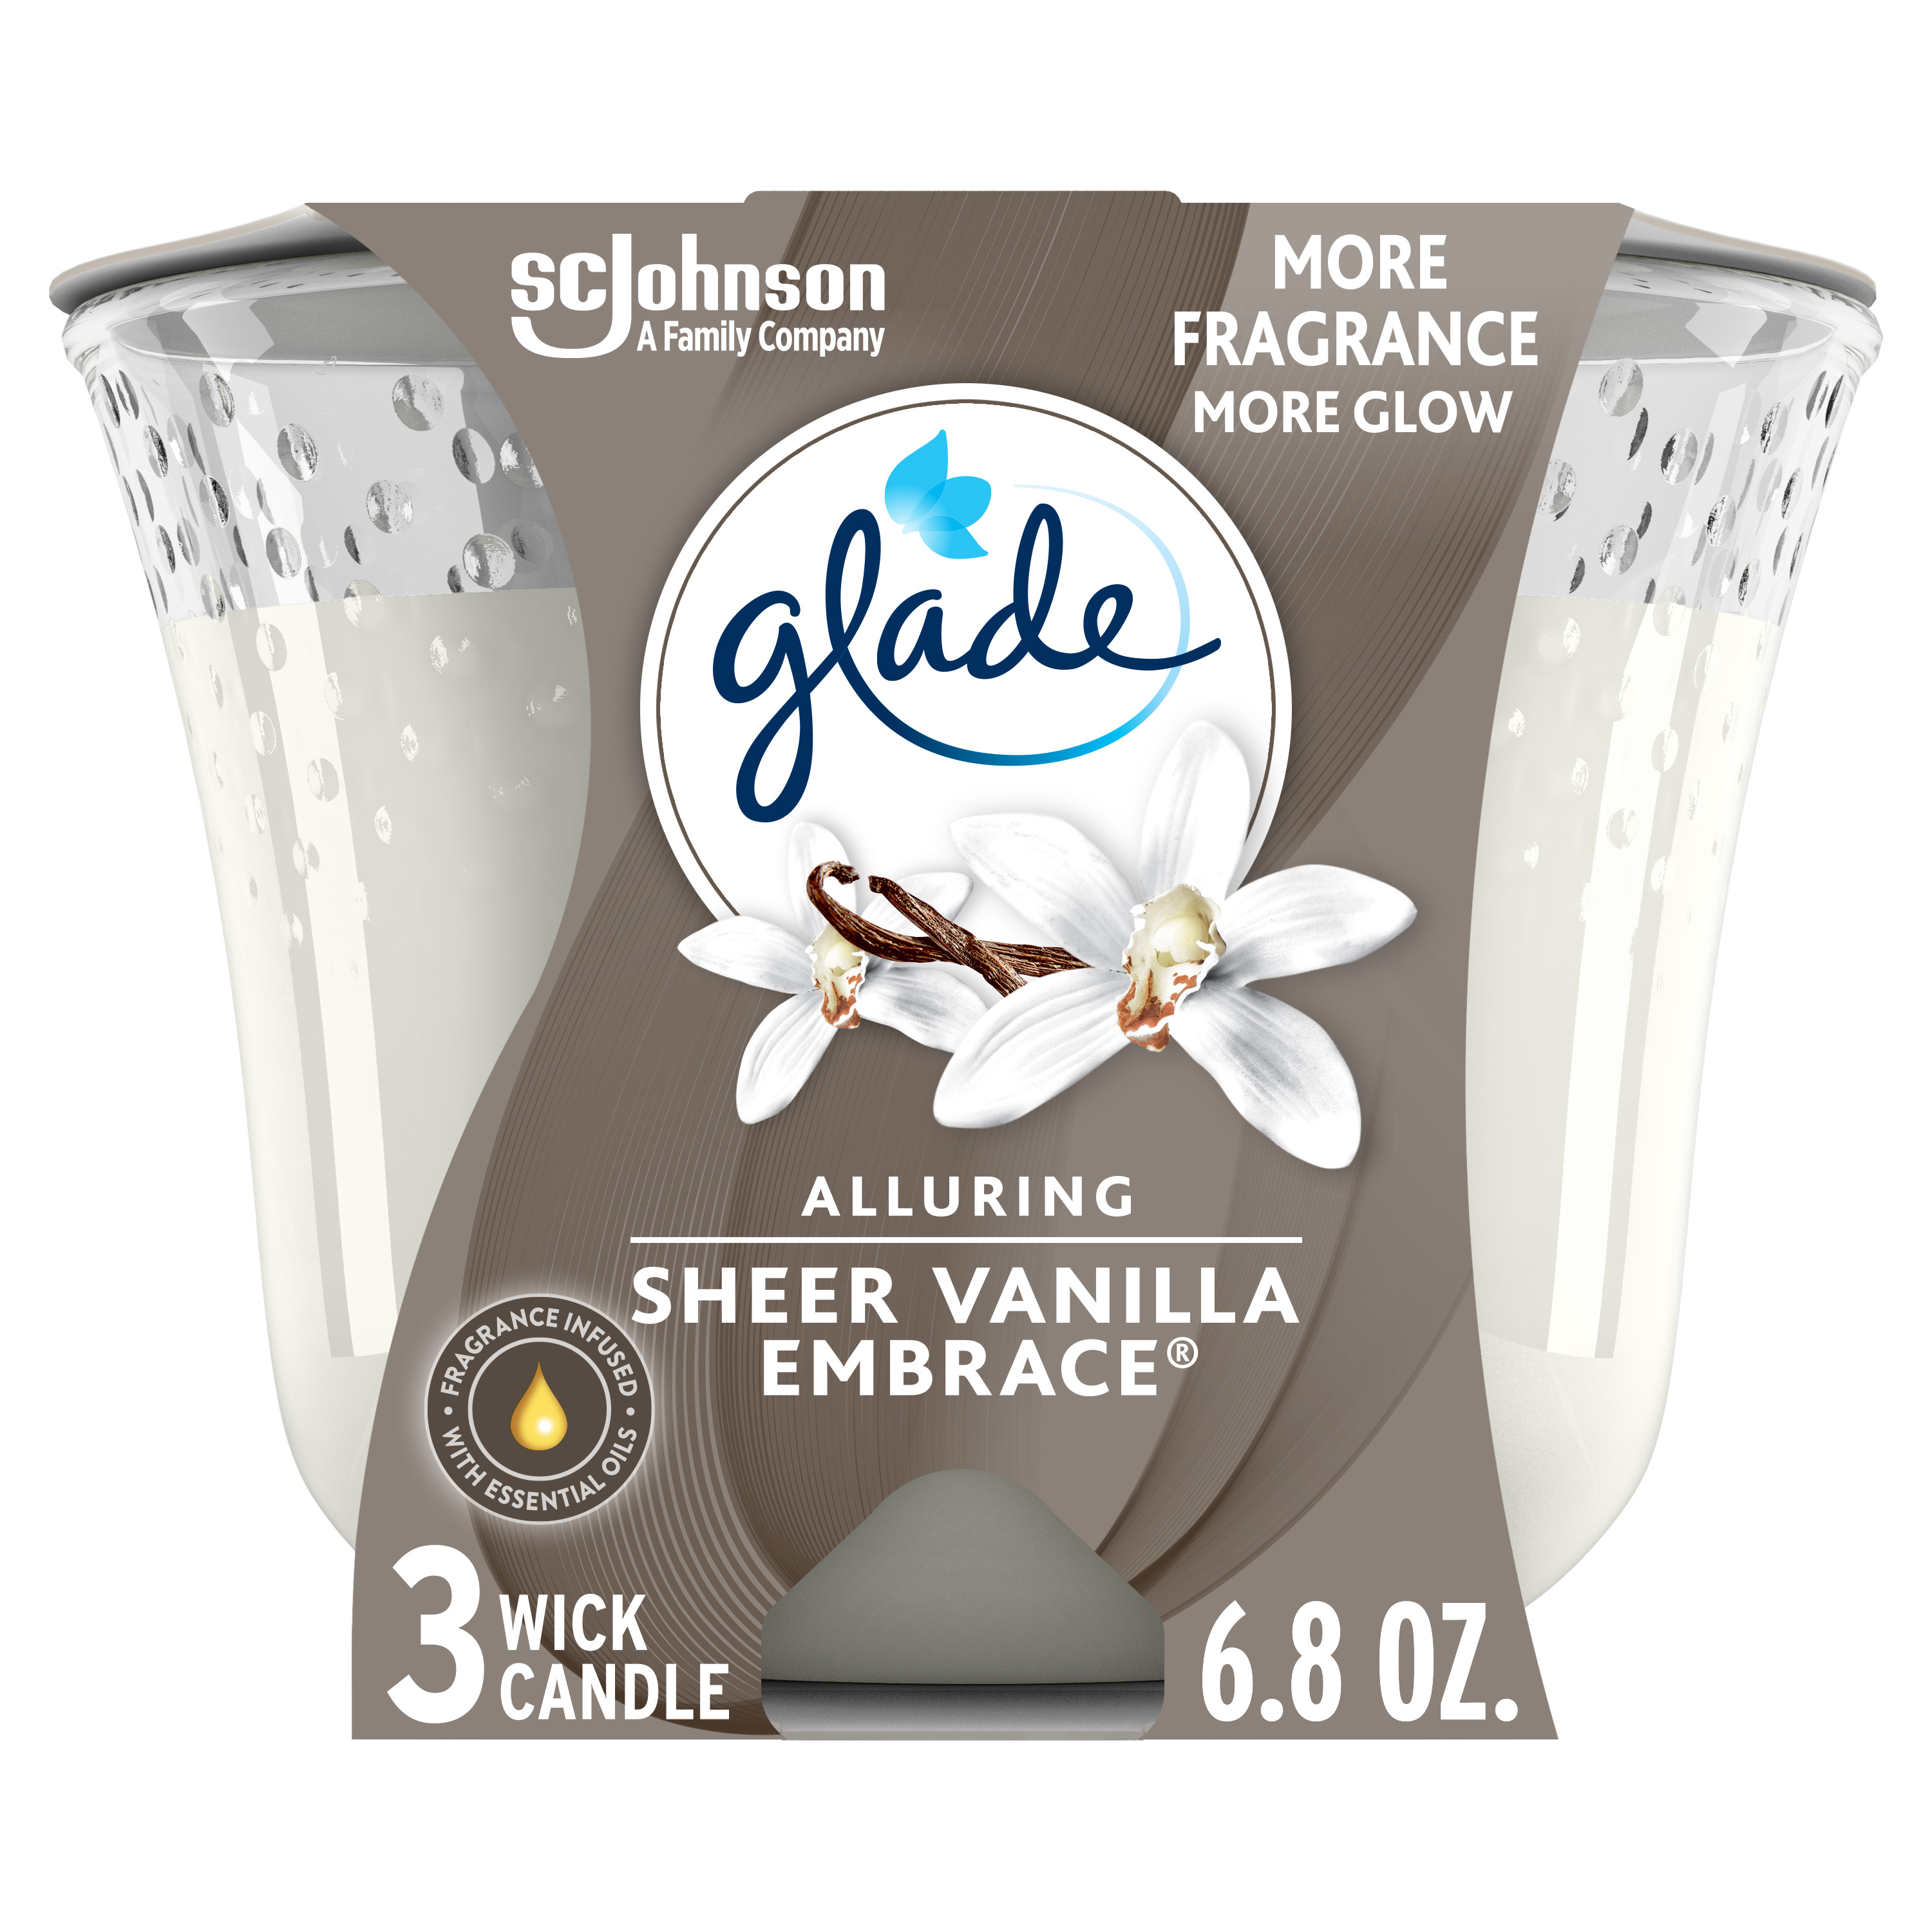 Glade Candle Alluring Sheer Vanilla Embrace Scent, 3-Wick, 6.8 oz (193 g), 1 Count, Fragrance Infused with Essential Oils, Notes of Vanilla Blossom, White Orchid, Sandalwood Scented Candles - image 1 of 12